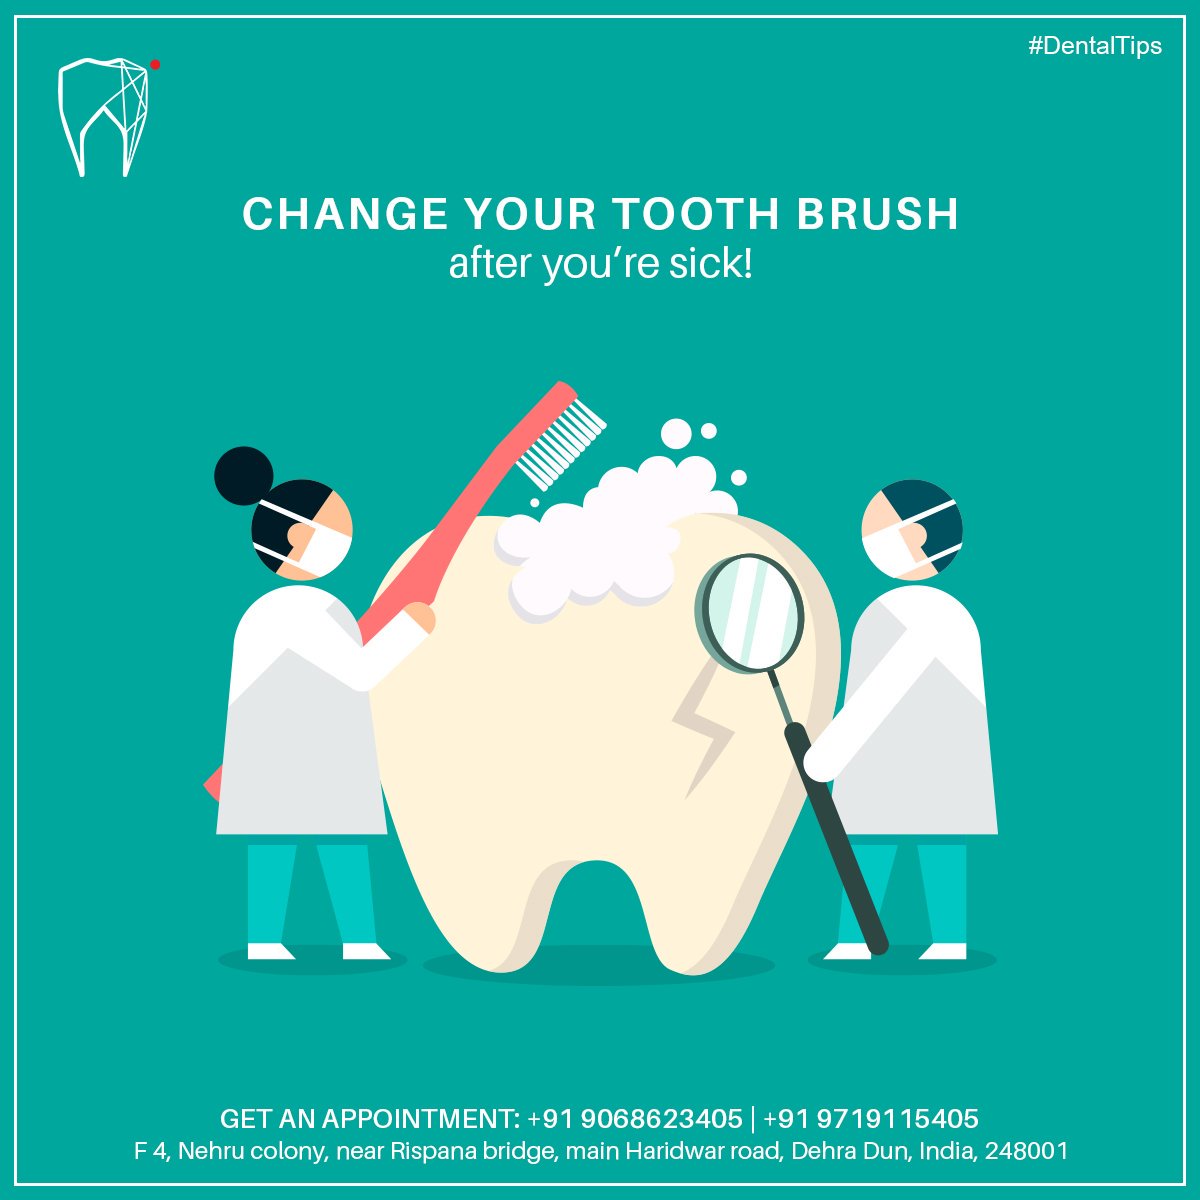 Be sure to change out your toothbrush after being ill to avoid getting sick all over again!

Get an appointment: +91 9068623405, +91 9719115405

#DentalTips #doon | #dehradun #uttarakhand | #microscopicdentistry | #microscope | #carlzeissmicroscope | #LuxmiDentalClinic